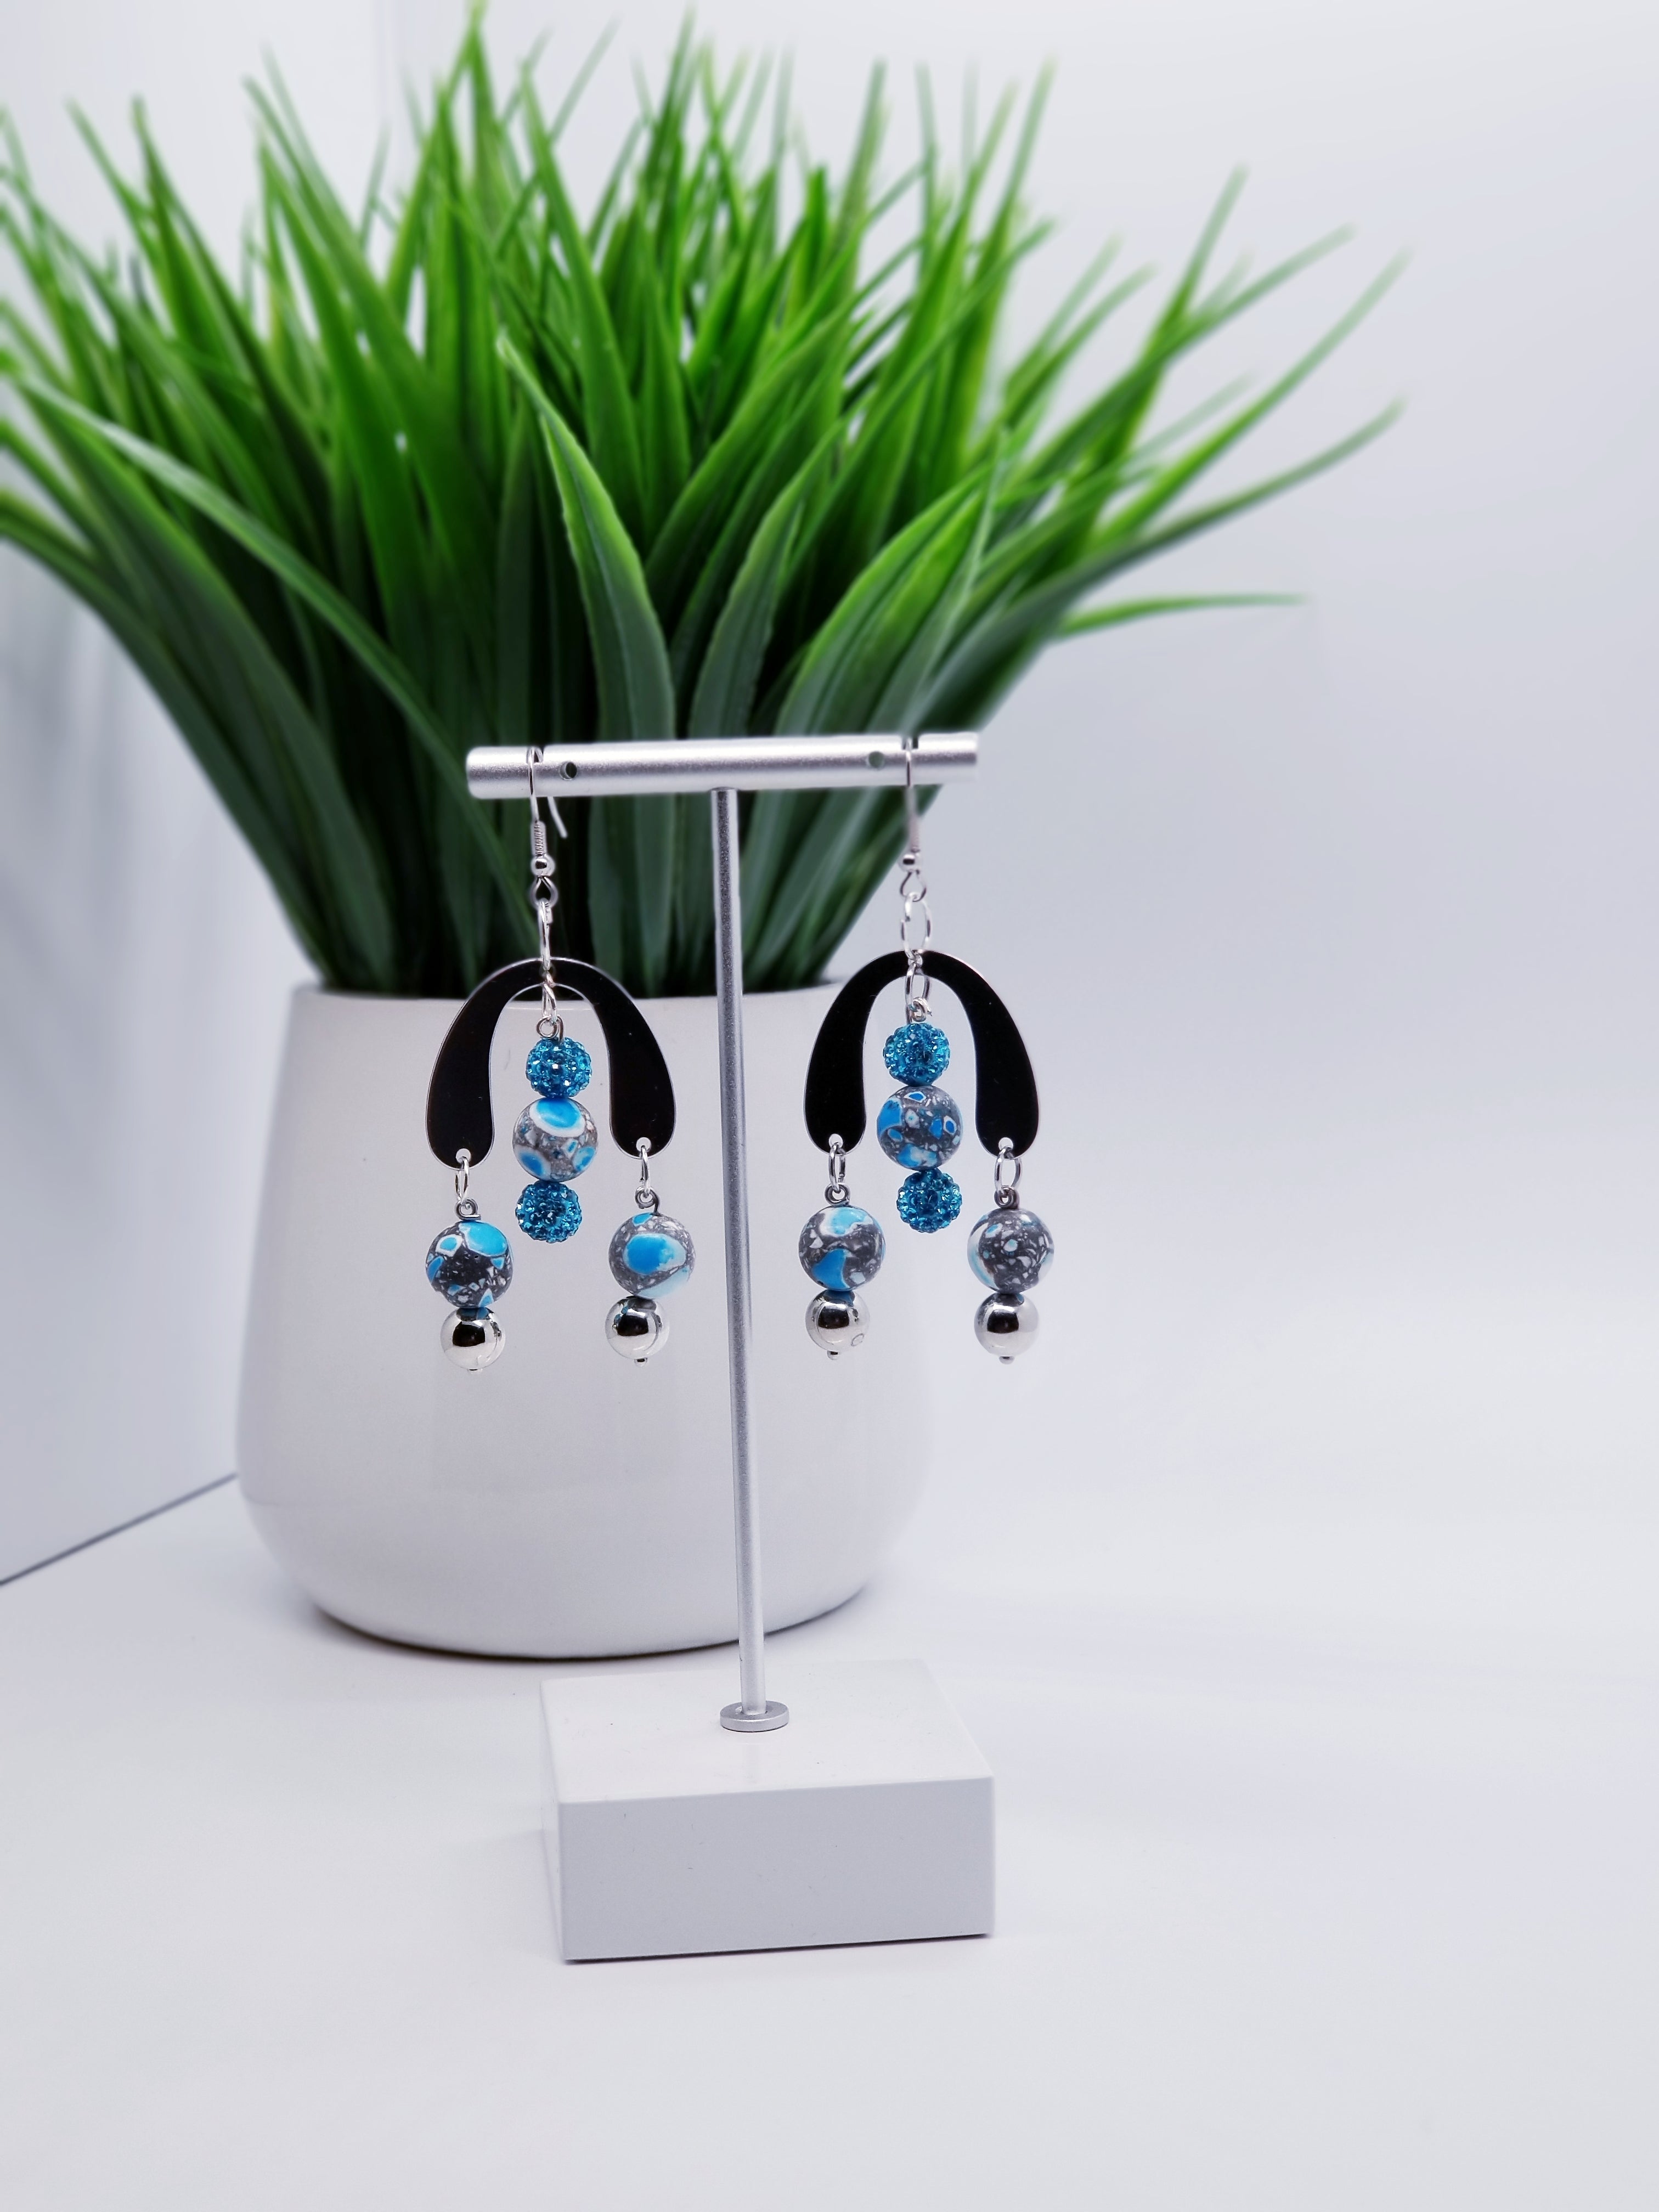 Length: 3 inches | Weight: 0.6 ounces  Designed just for you! The earrings are handmade using speckled black and aqua matte beads, aqua pave ball spacers, silver u-shaped charm, silver metal beads, silver head pins, and hypoallergenic hooks with back closures. 